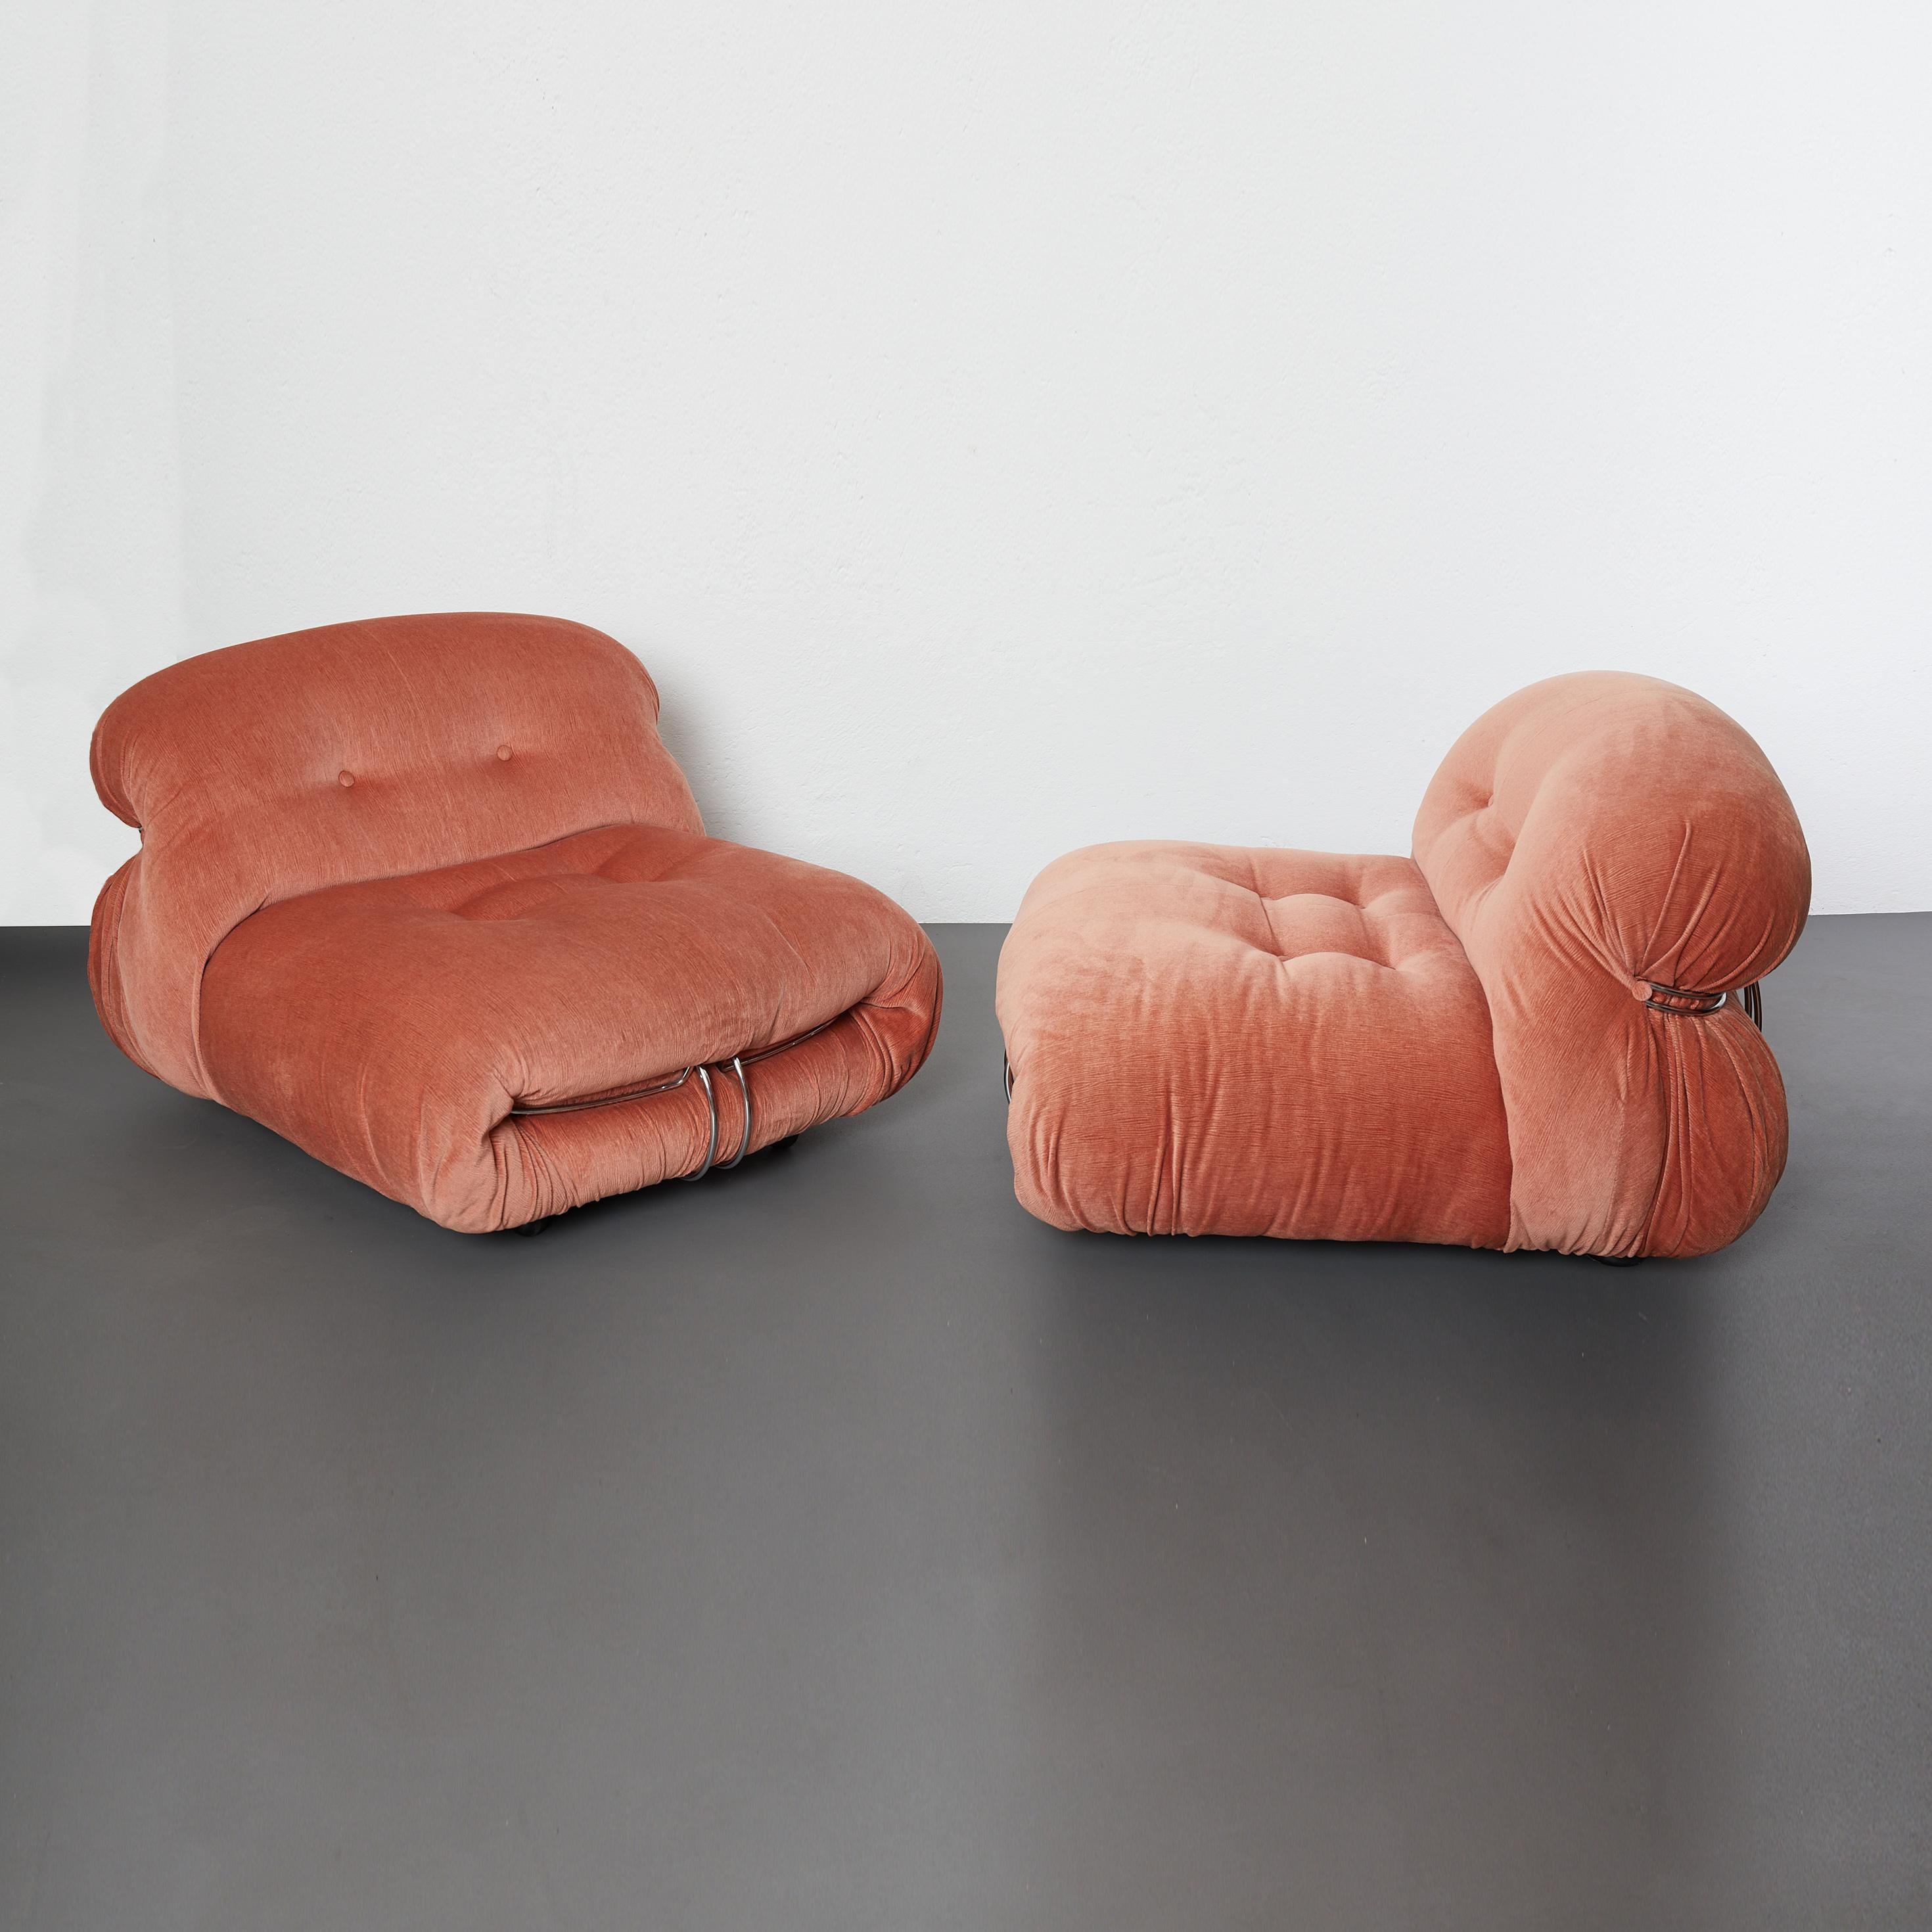 Late 20th Century Pair of Soriana Lounge Chairs by Afra and Tobia Scarpa, Cassina, 1970